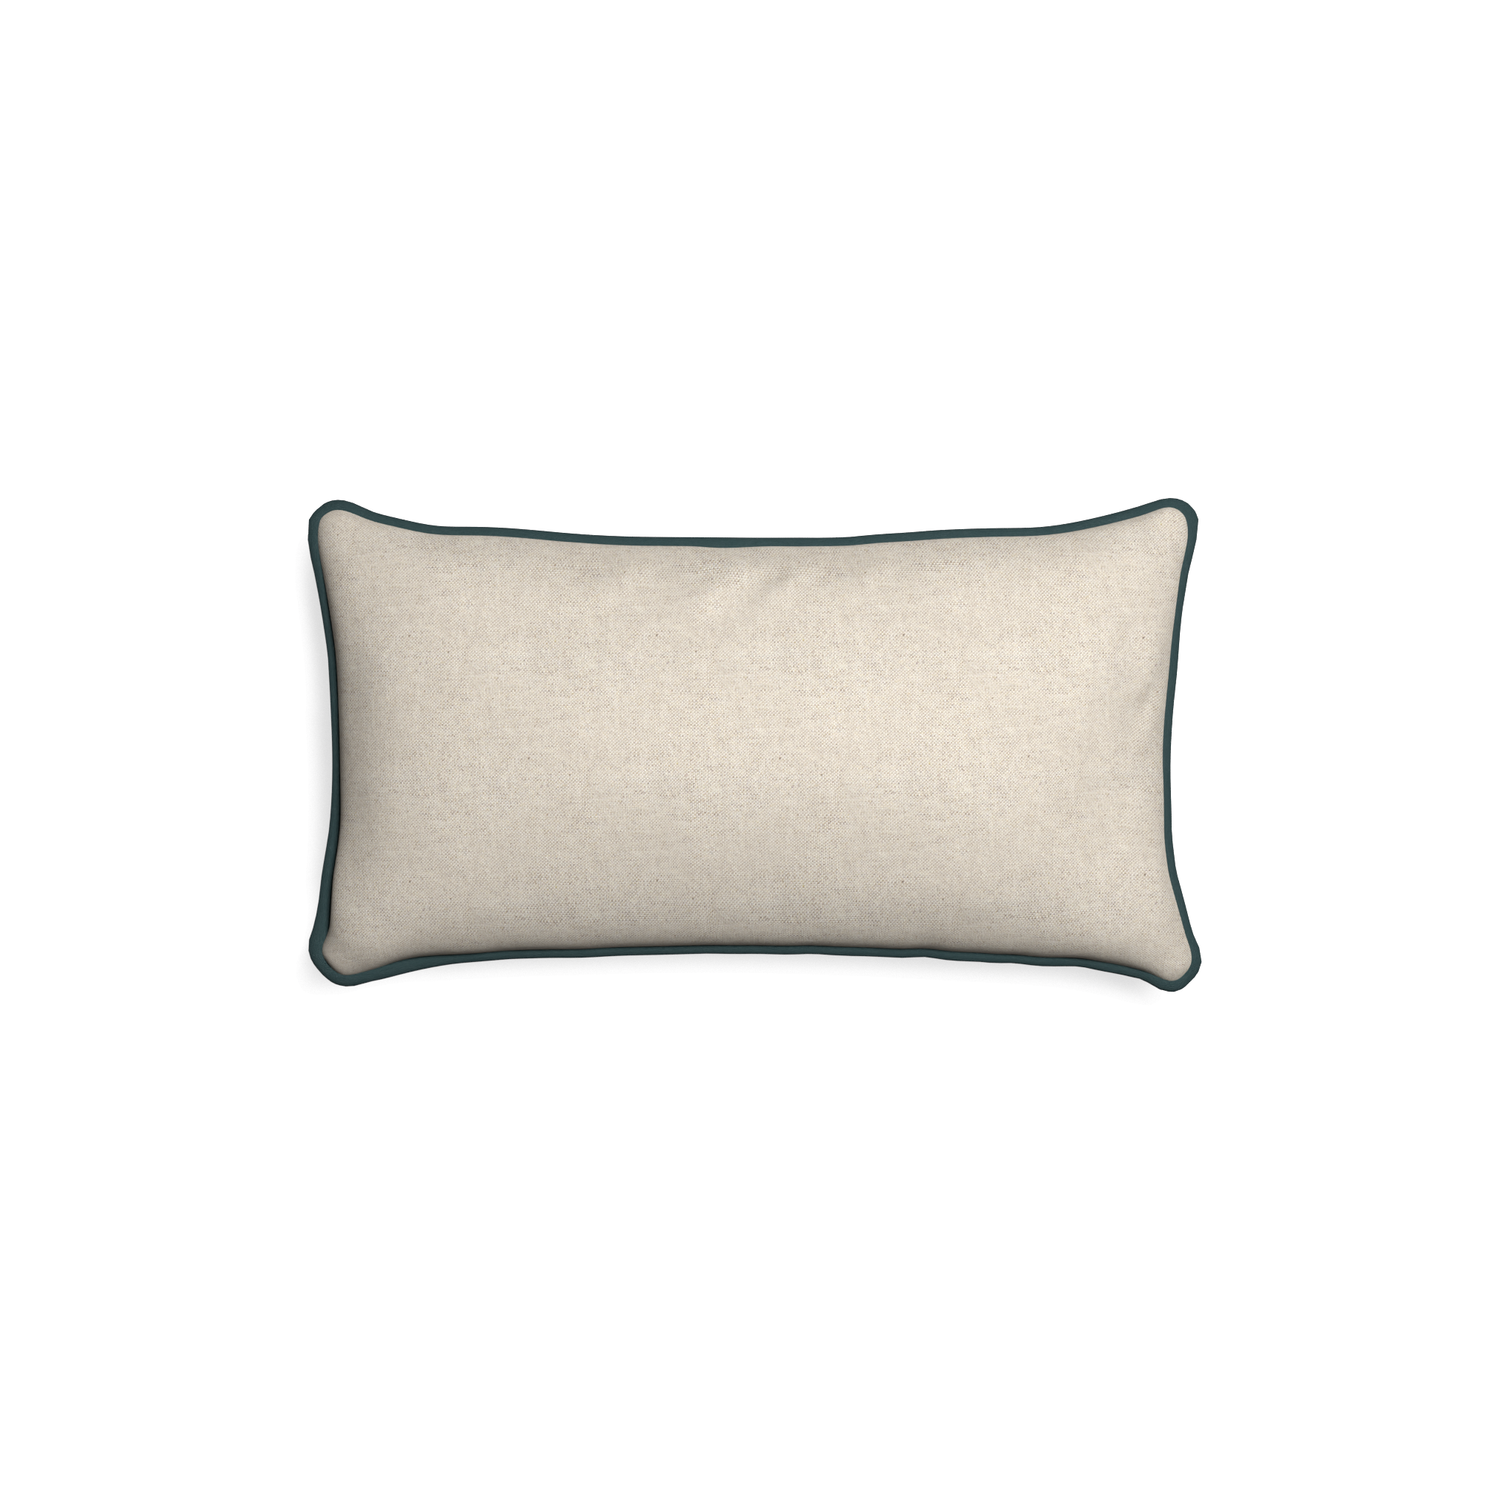 Petite-lumbar oat custom light brownpillow with p piping on white background